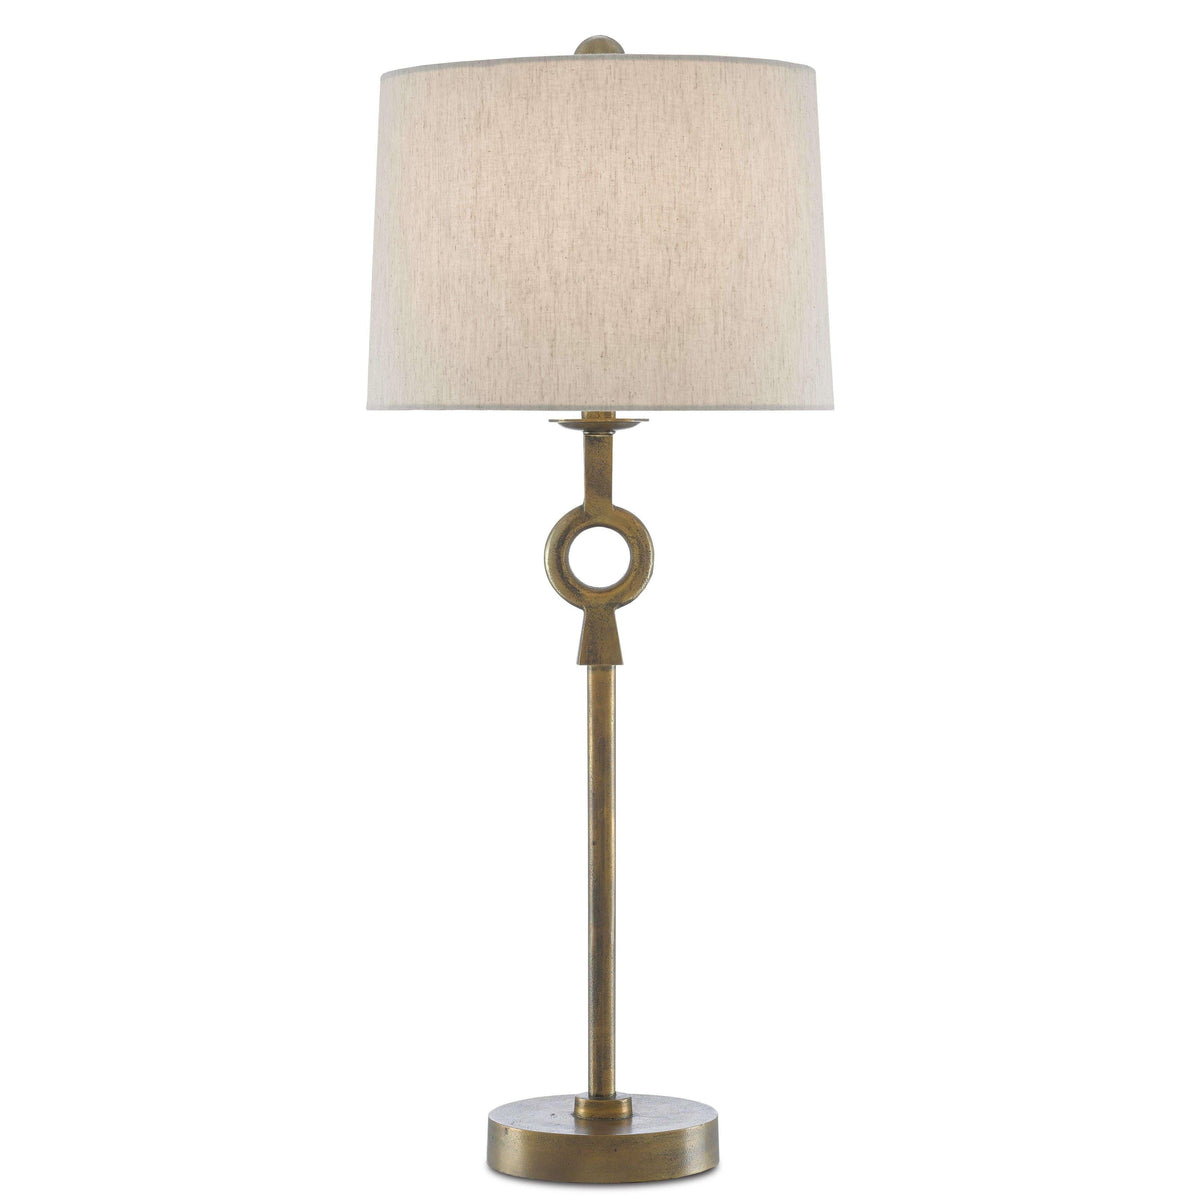 Currey and Company - Germaine Table Lamp - 6000-0530 | Montreal Lighting & Hardware